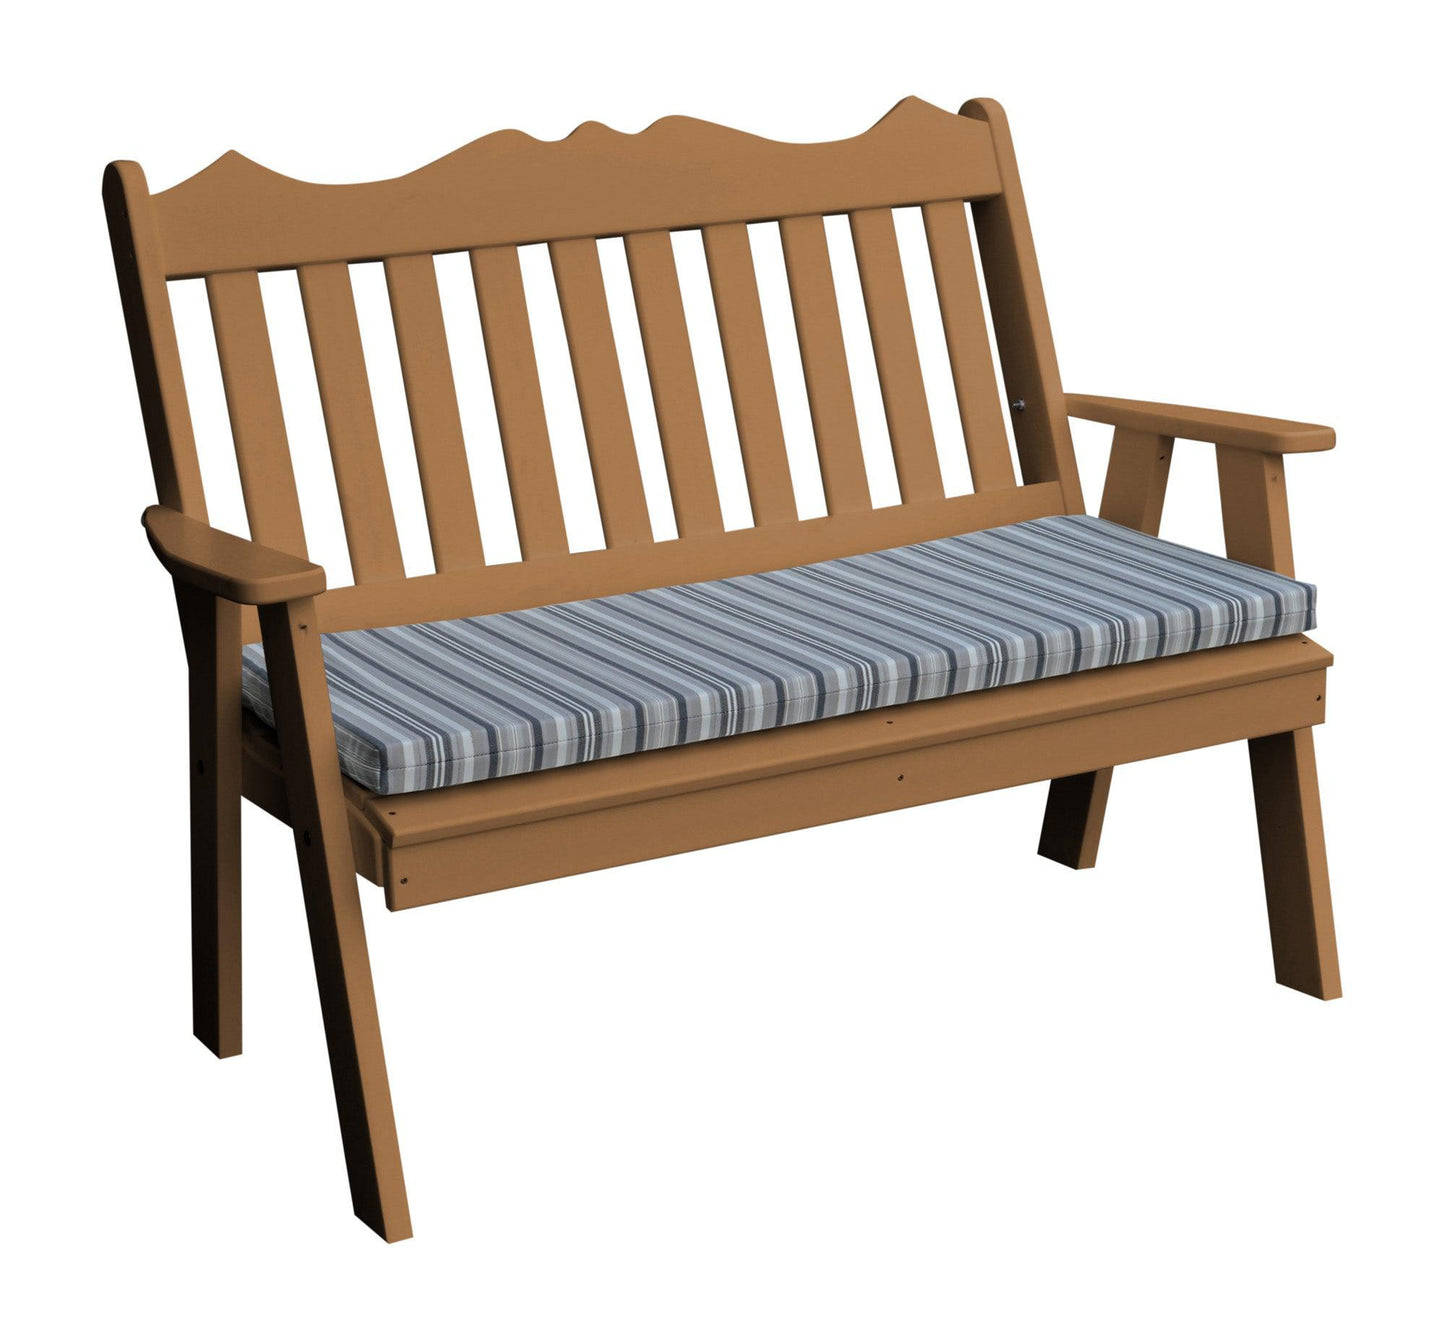 A&L Furniture Company Recycled Plastic 5' Royal English Garden Bench - LEAD TIME TO SHIP 10 BUSINESS DAYS